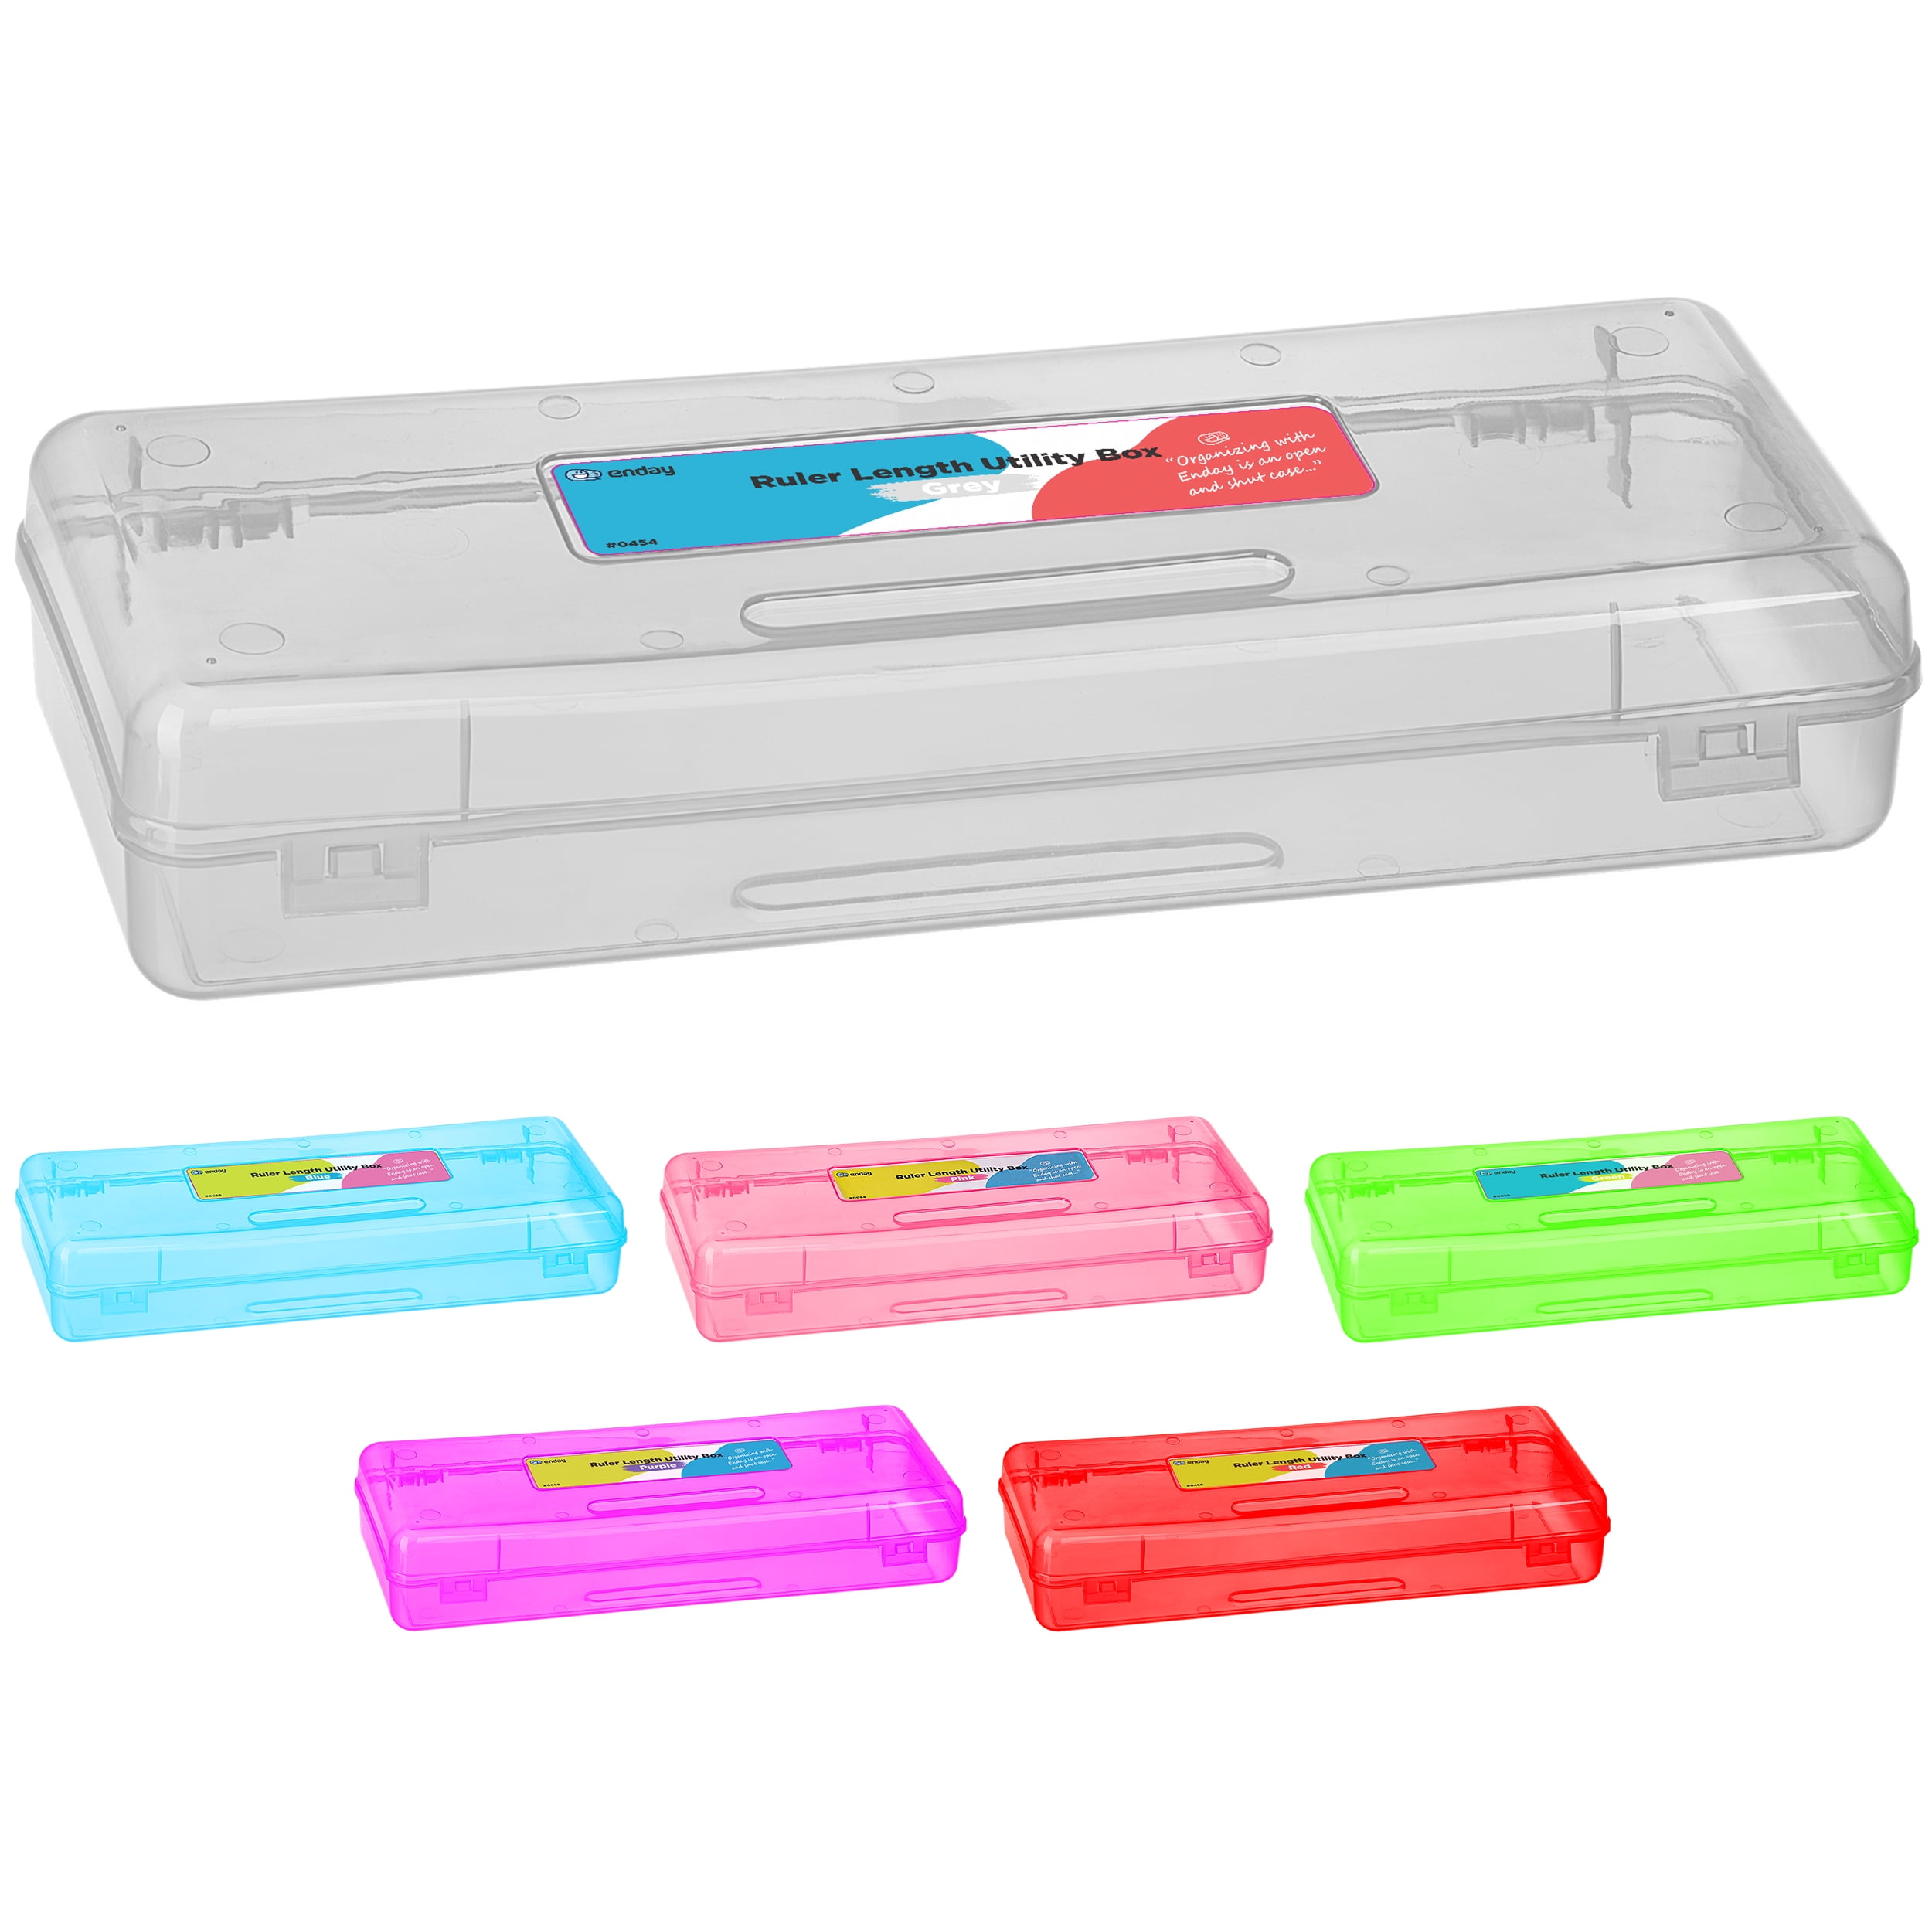 Storage Organizer Utility Box Pink Purple Green Pencil Box Grey By Enday Blue 1PK Multipurpose Long Ruler Length School Office Supplies Plastic Pencil Case for Kids & Adults Available in Red 